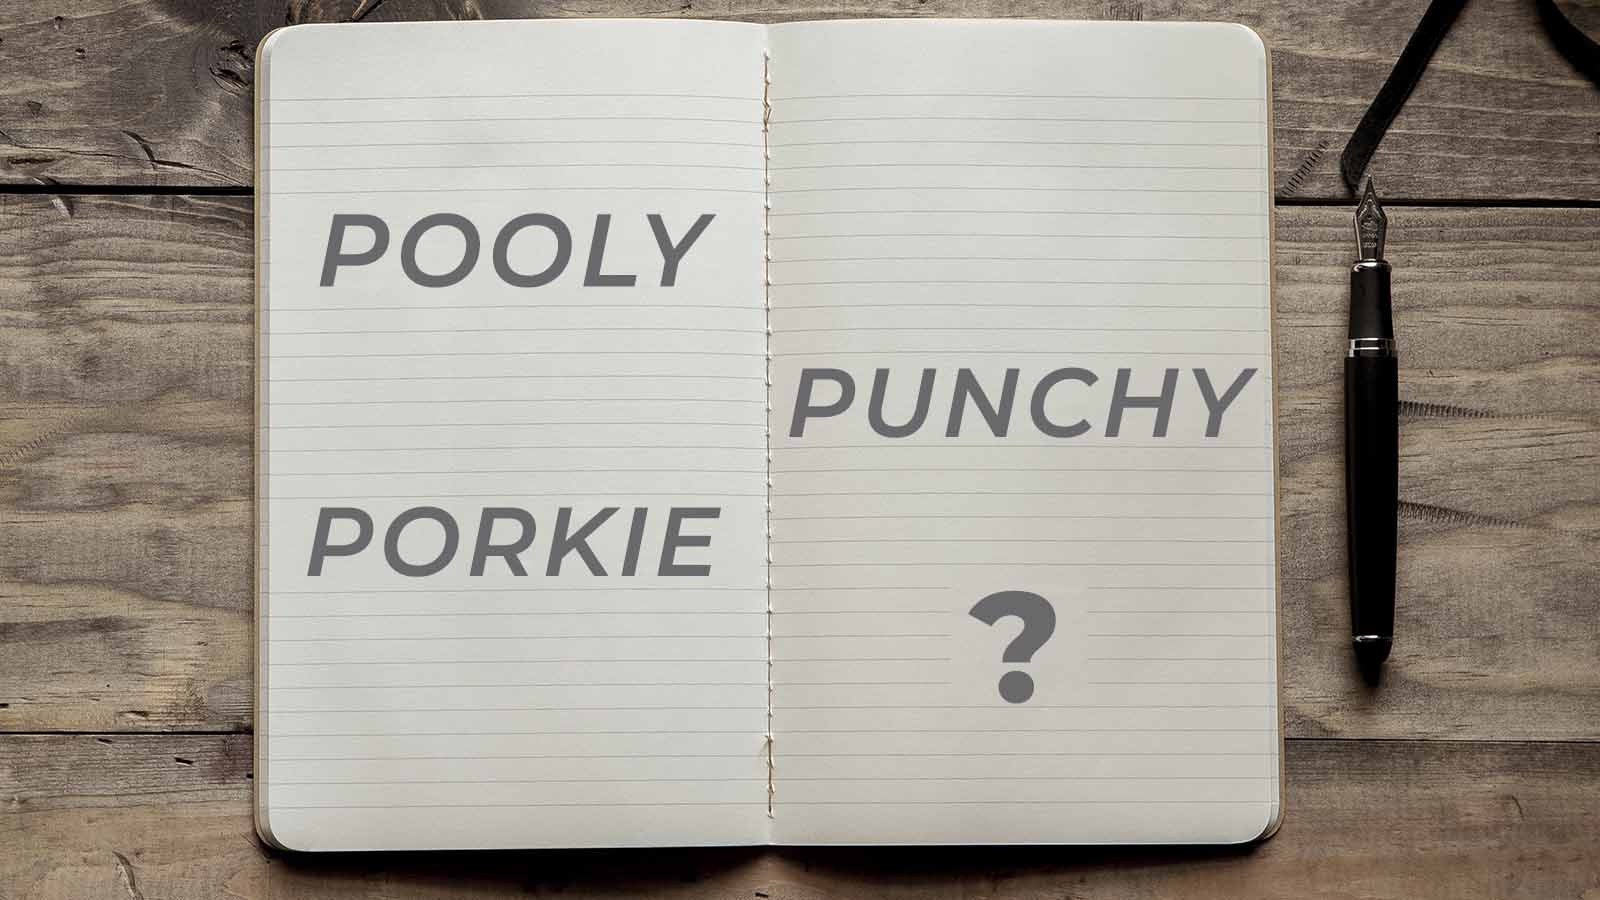 Unlikely Contestants Pooly, Porkie & Punchy